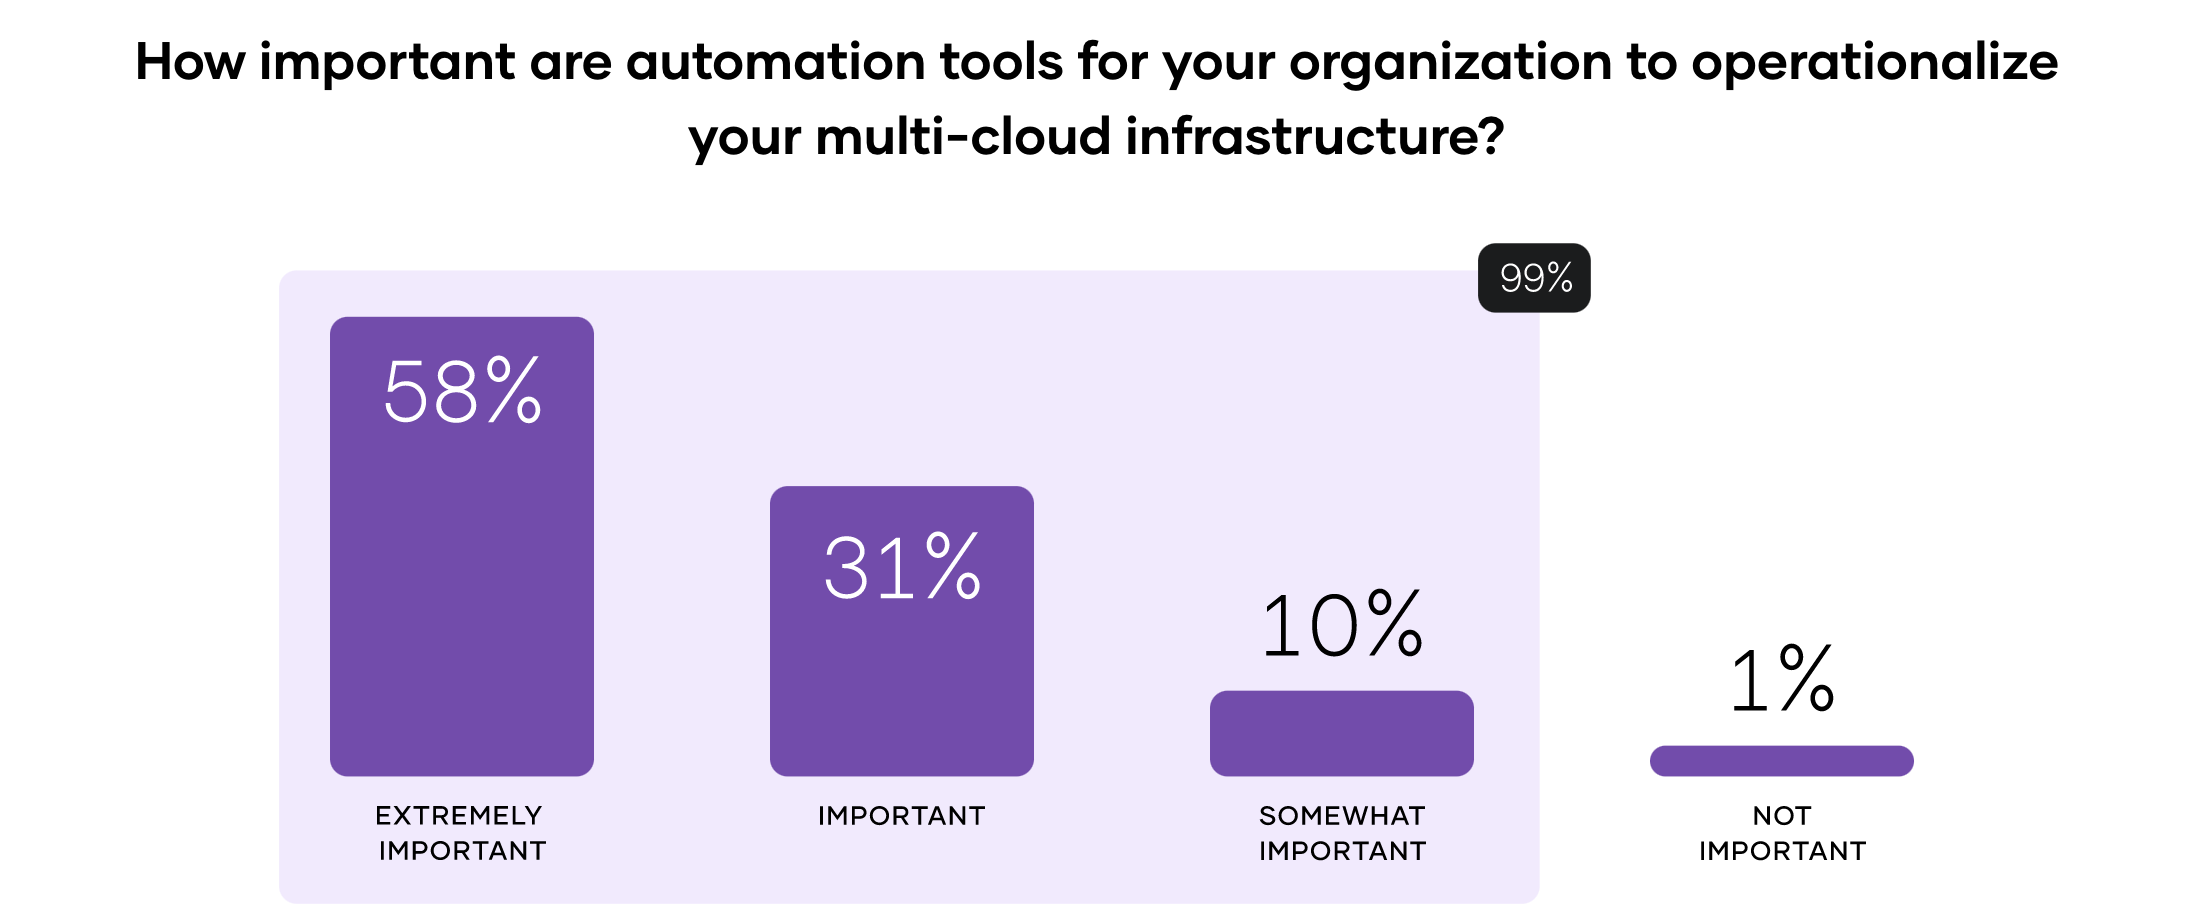 Importance of automation tools to multi-cloud